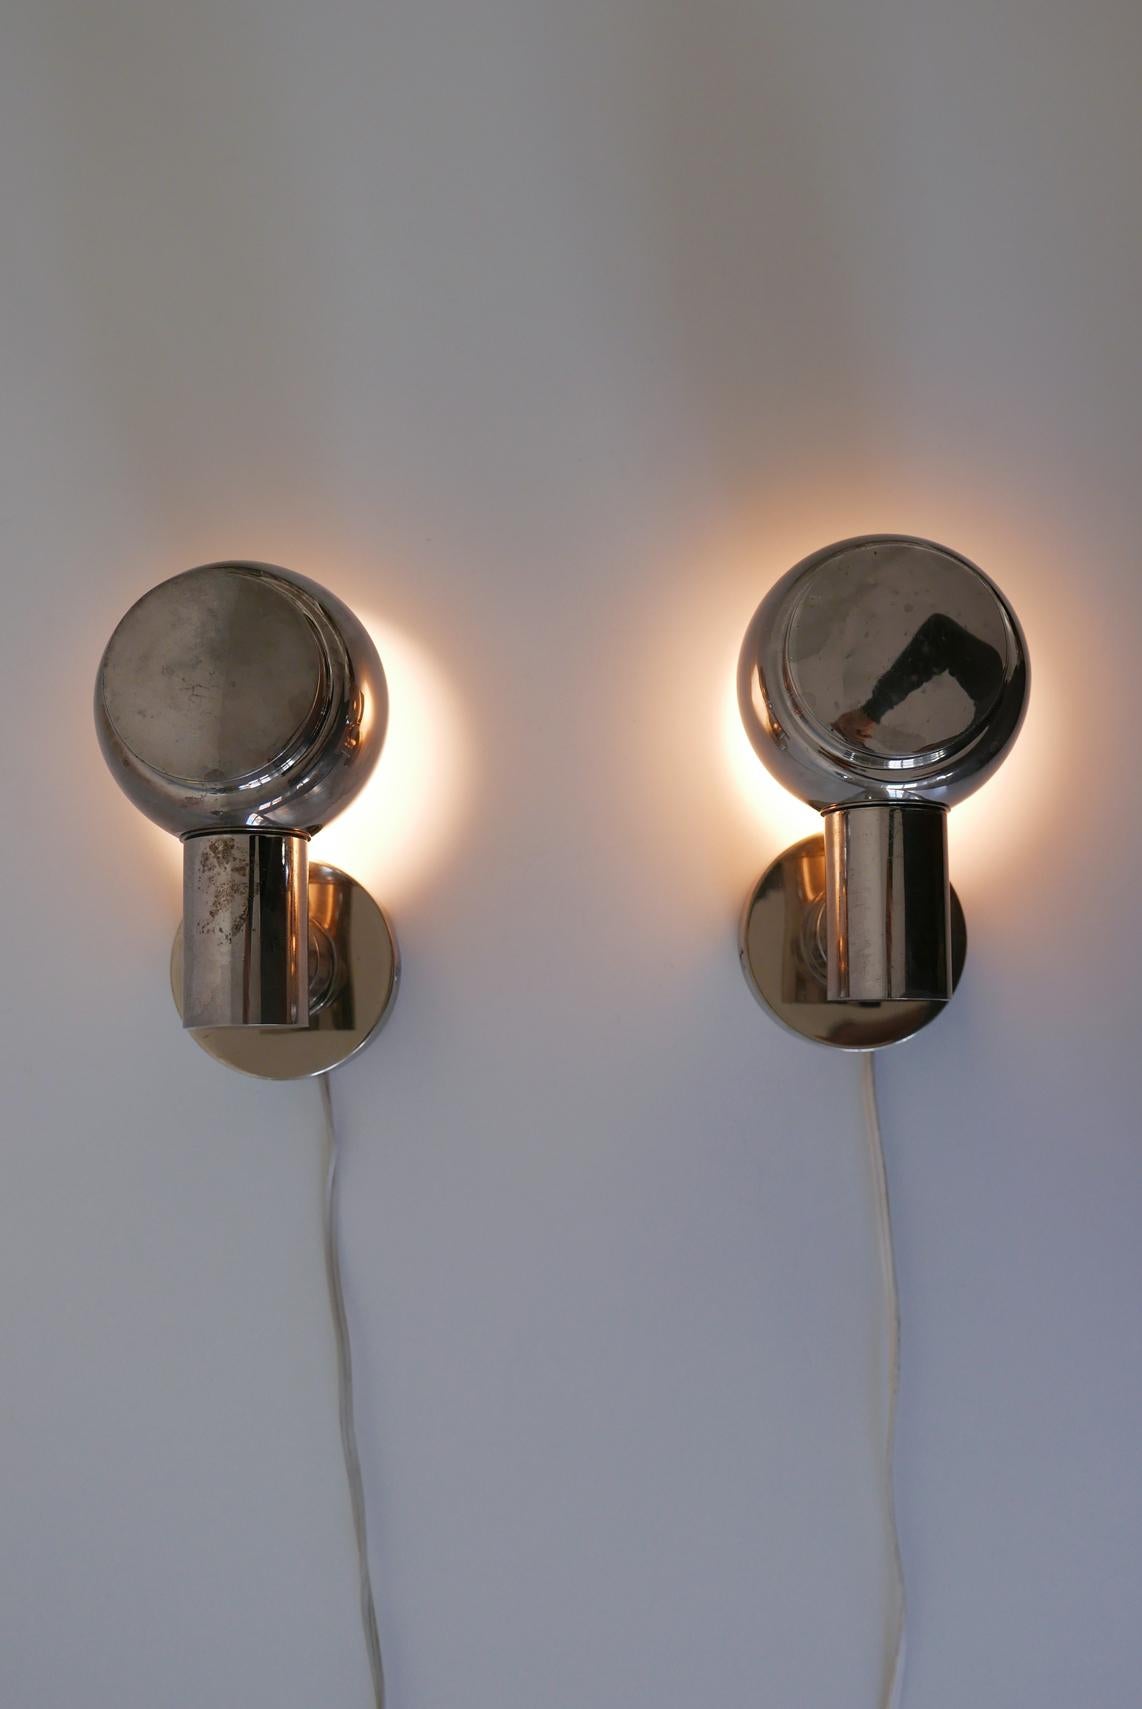 Set of Two Mid-Century Modern Wall Lamps or Sconces, 1960s, Germany For Sale 7